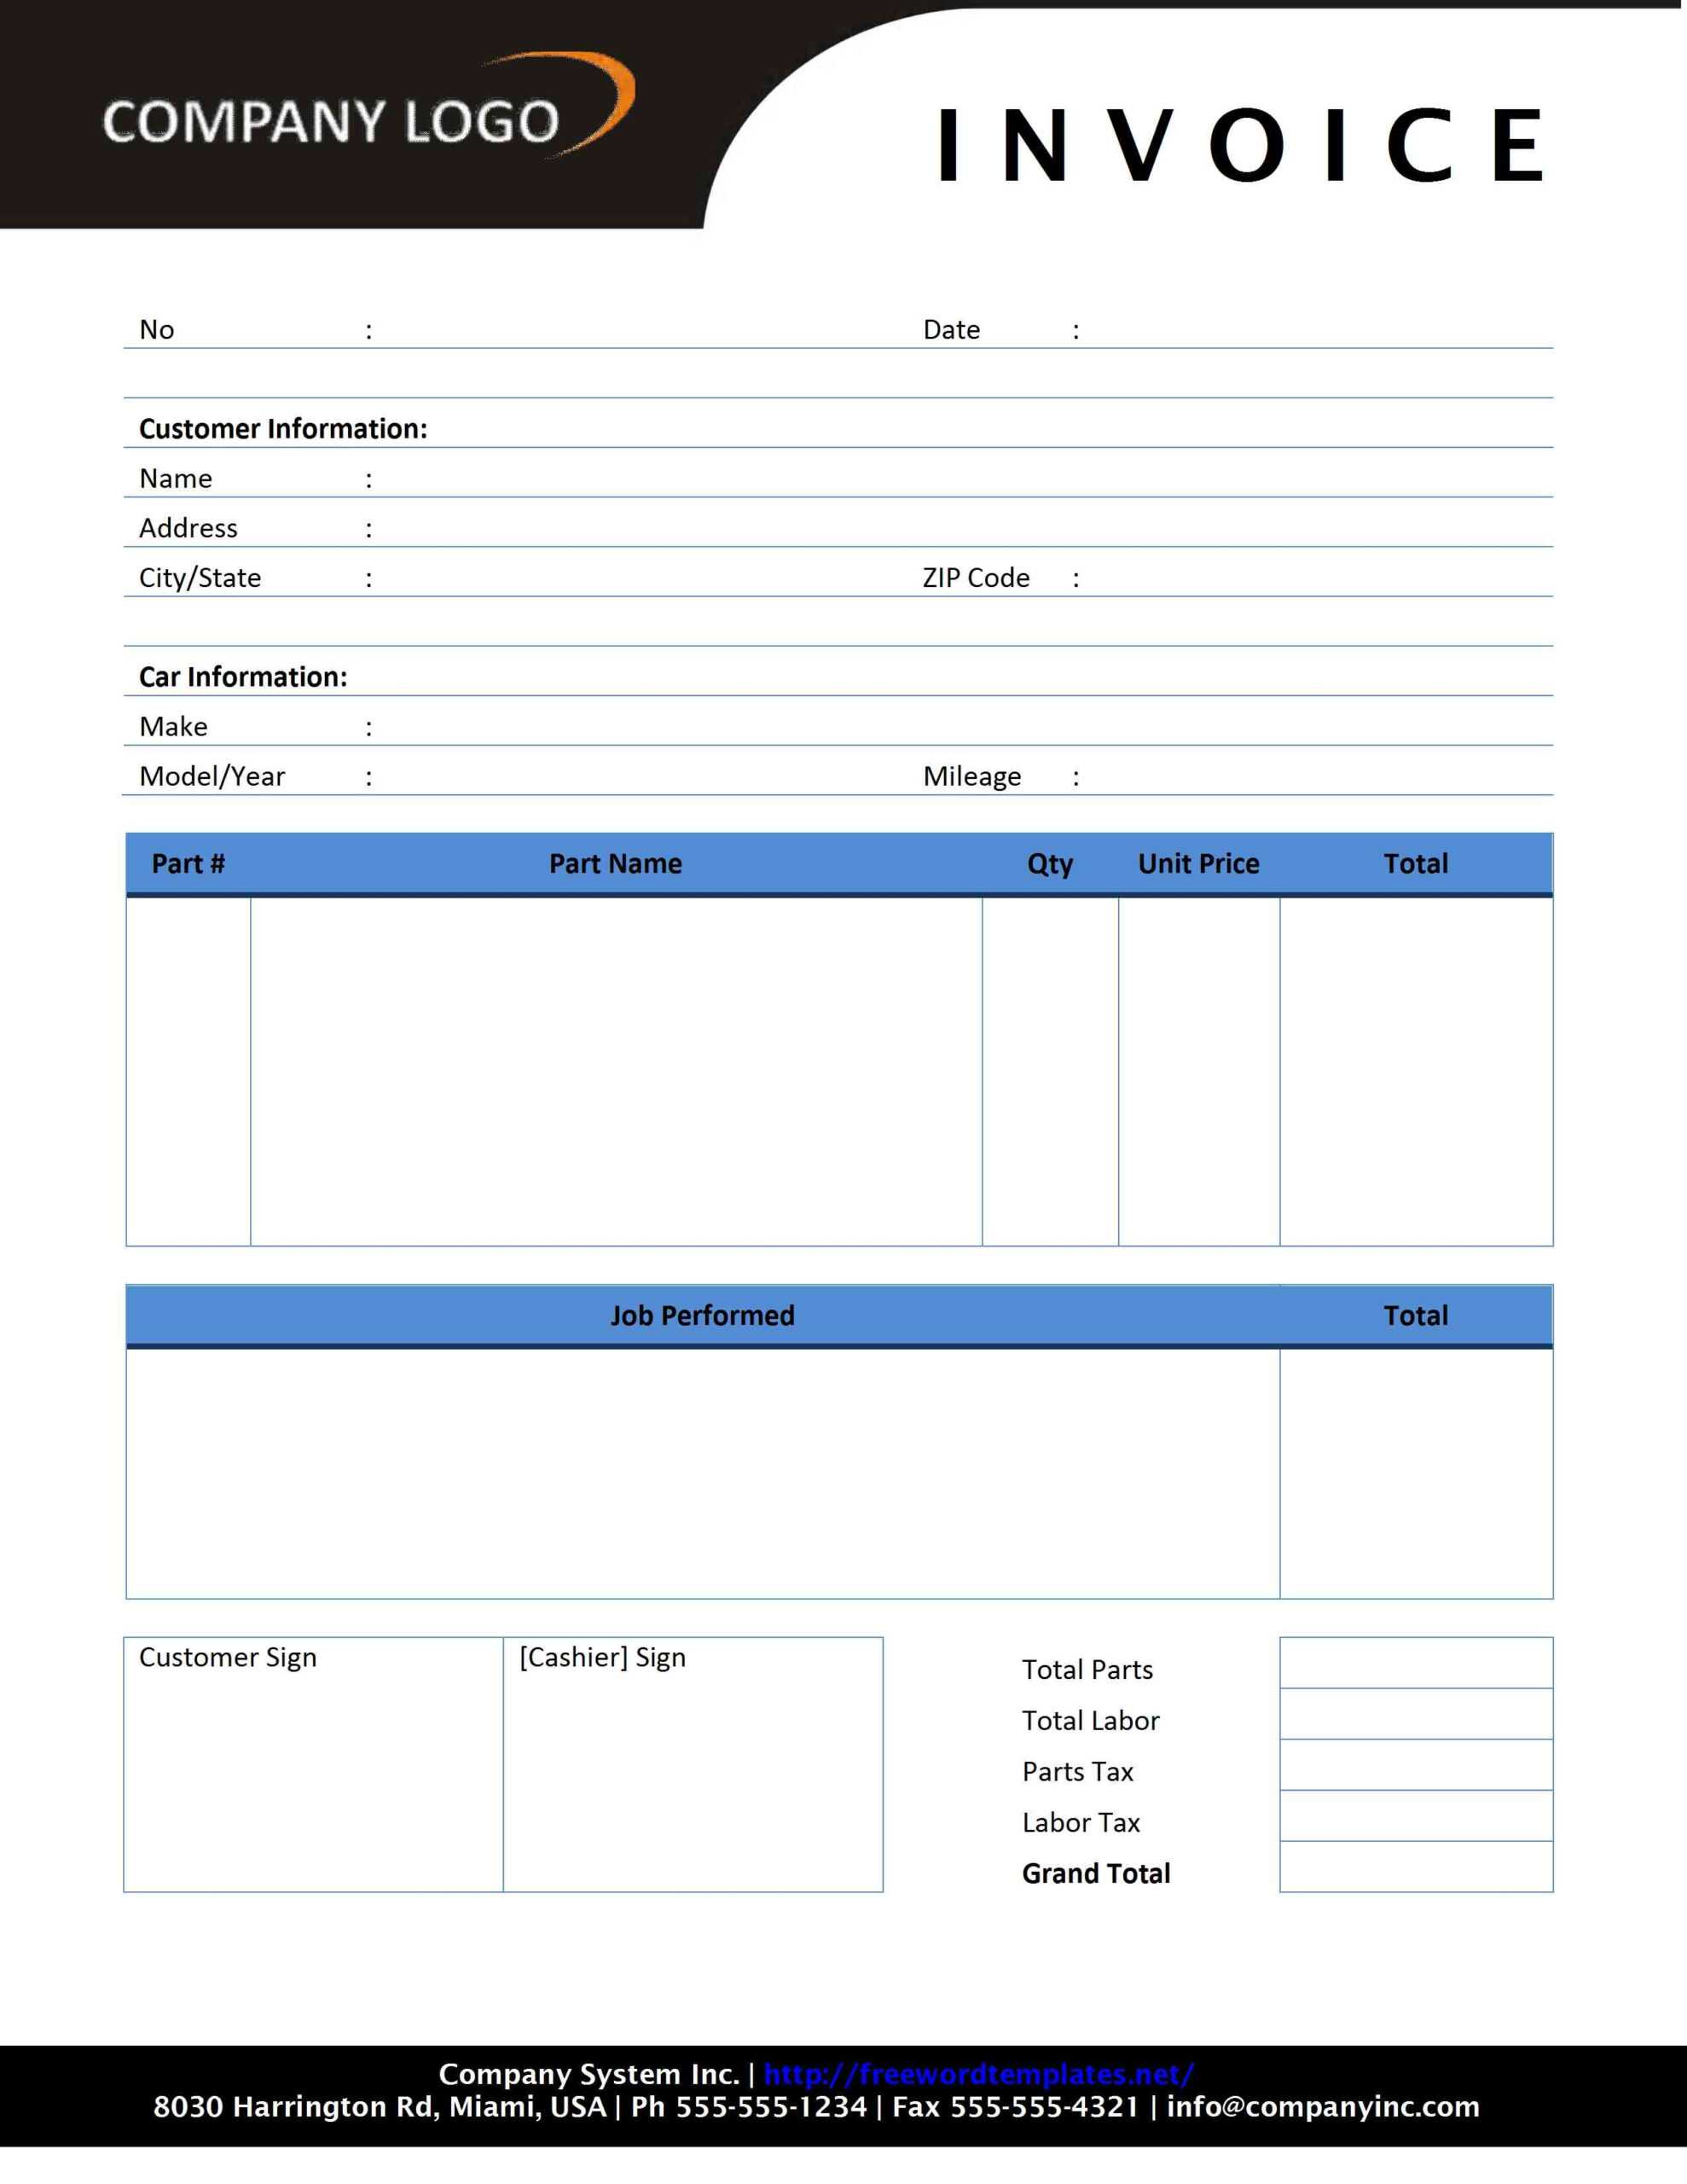 027 Service Invoice Template Free Business Creative Auto Inside Free Business Invoice Template Downloads